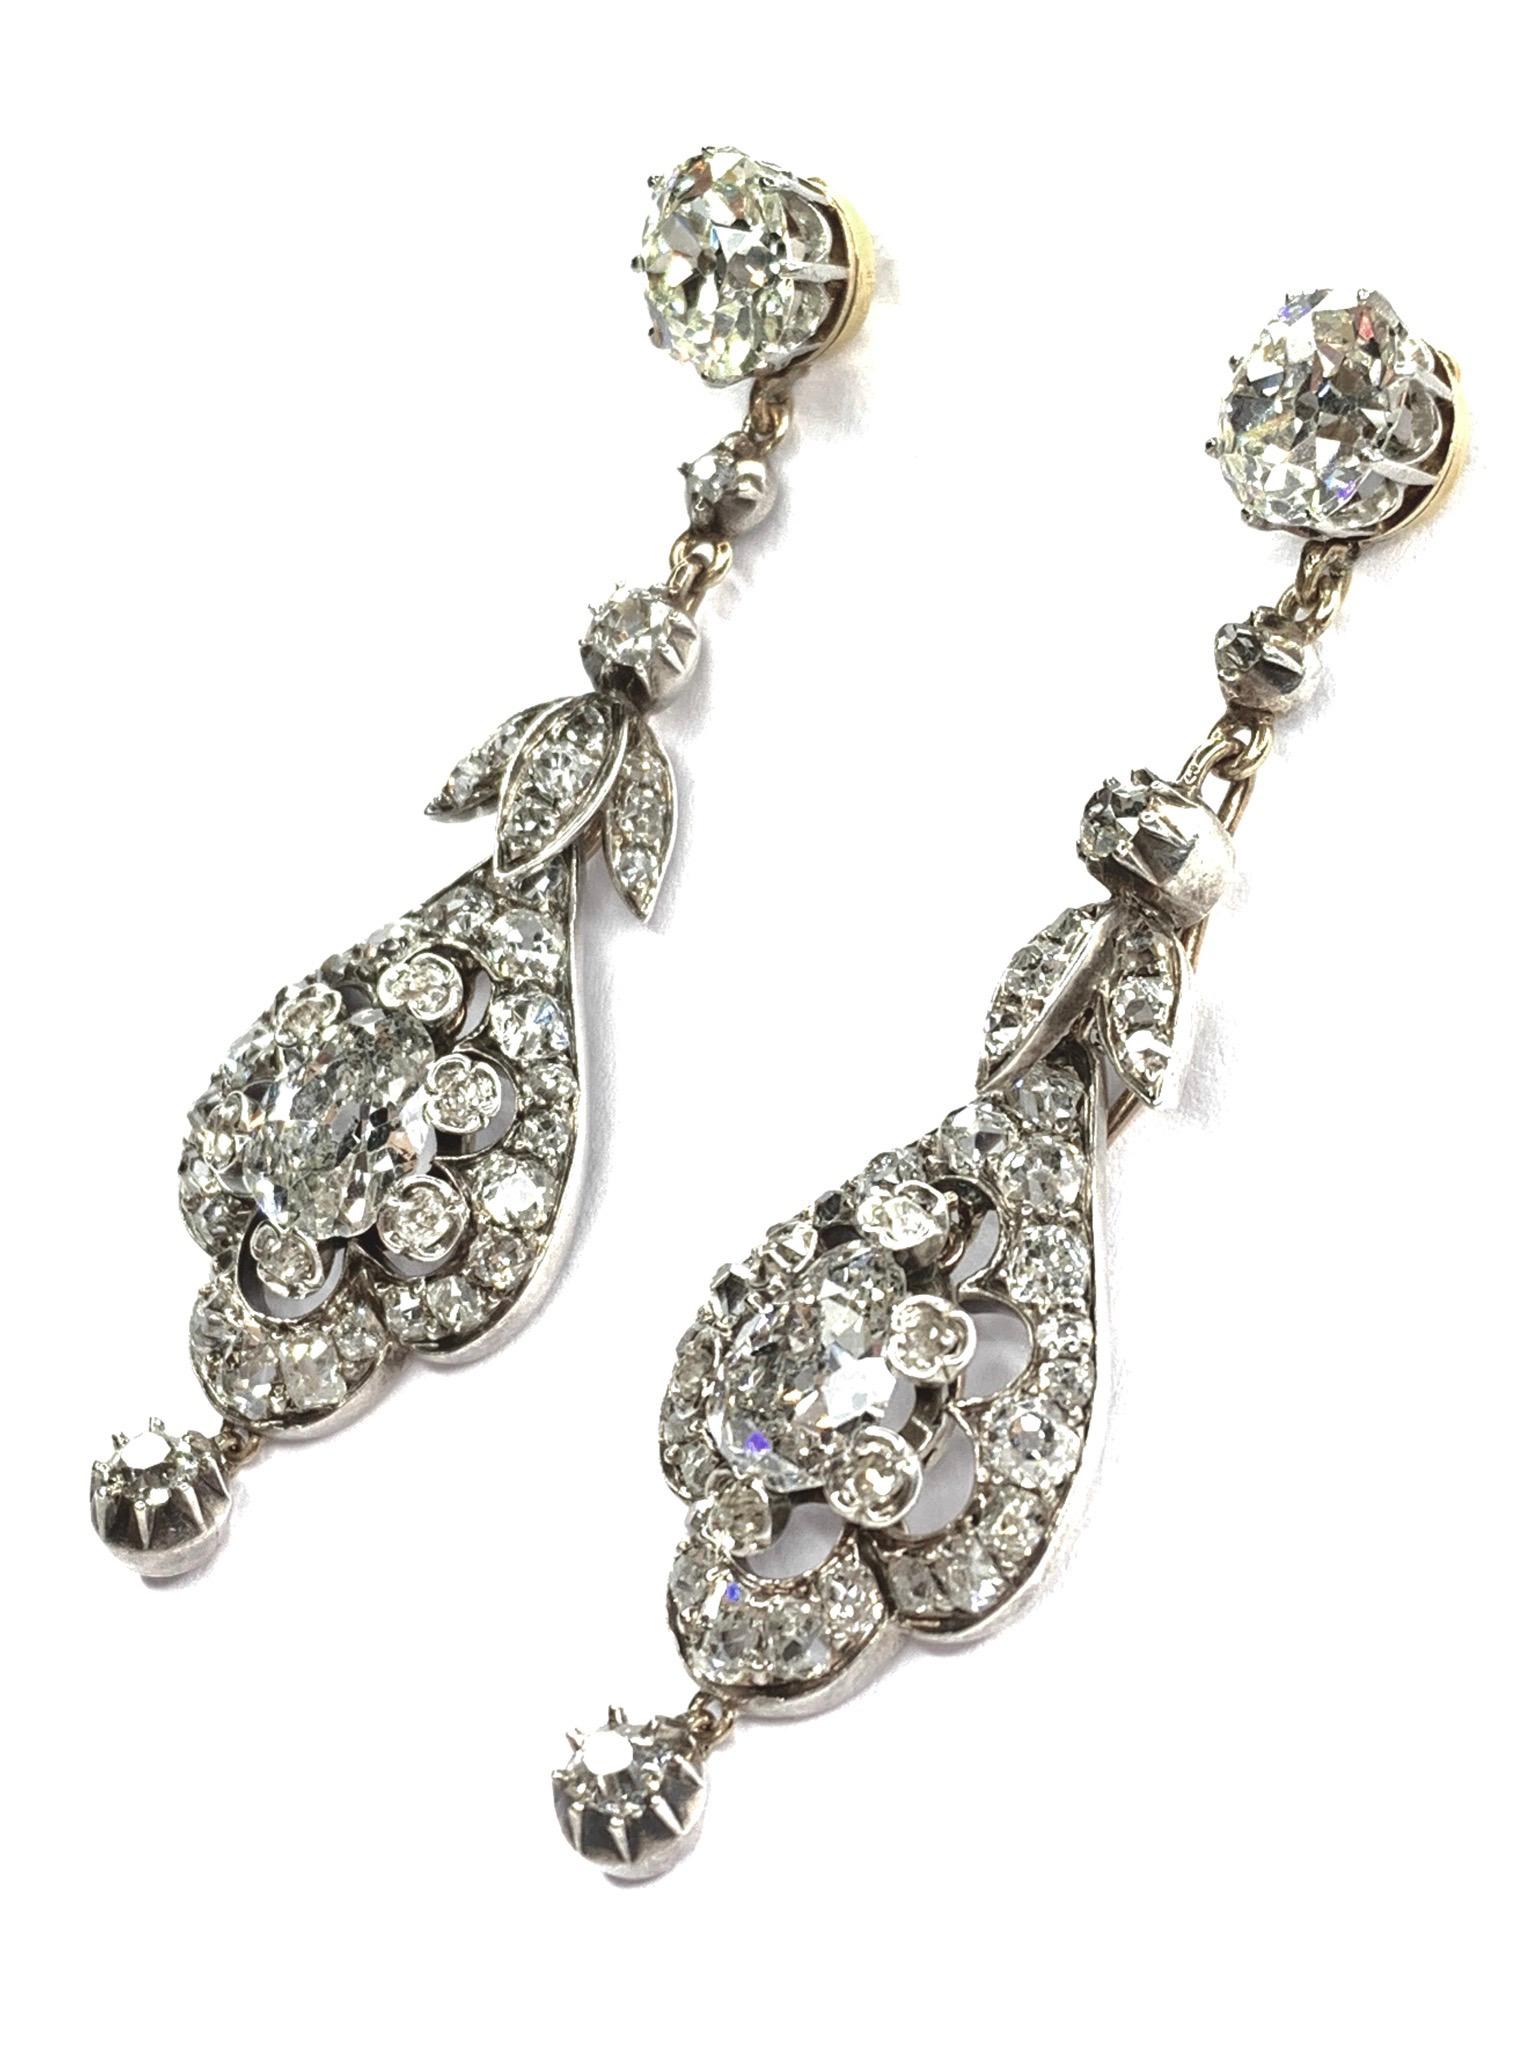 Late Victorian GEMOLITHOS Antique Pair of Diamond Earrings, Formerly from a Princely Family For Sale